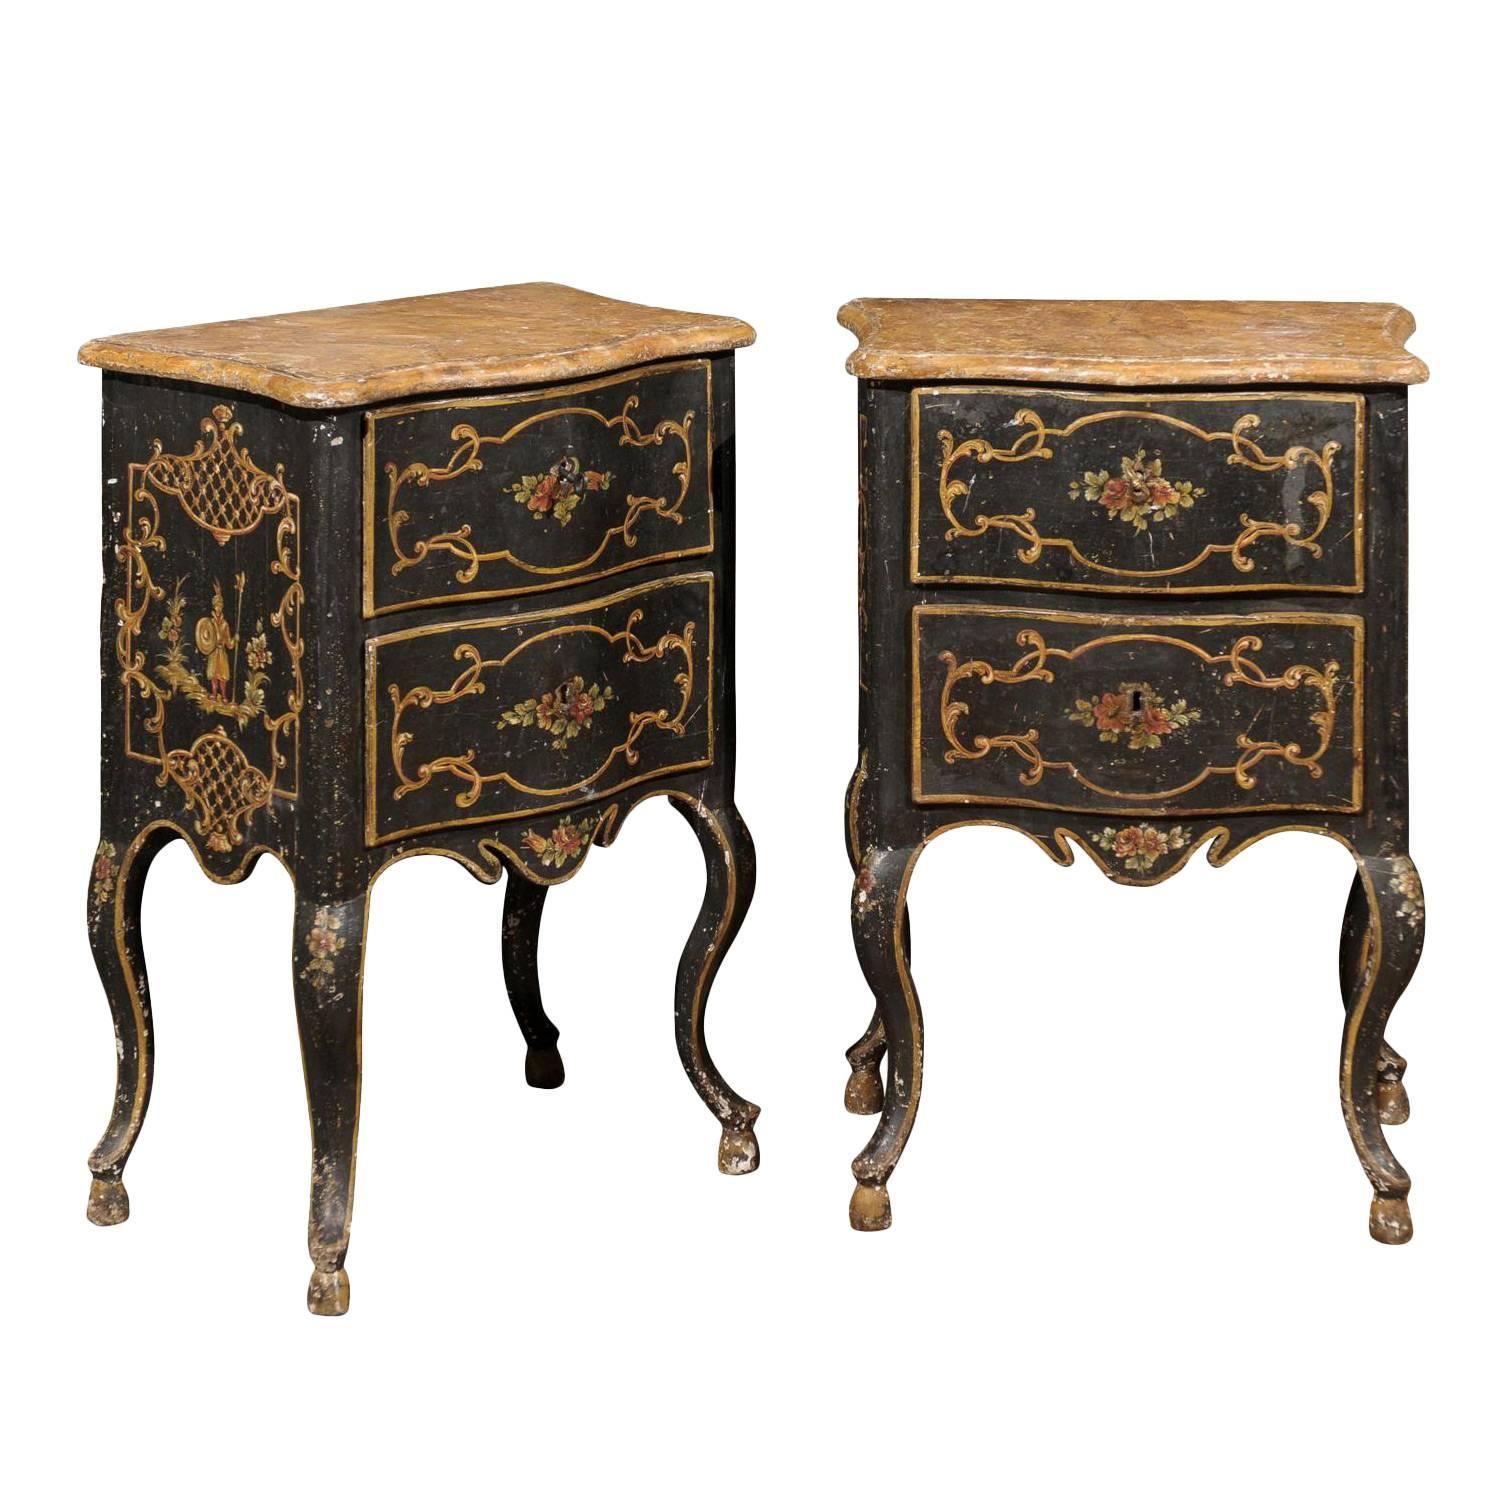 Pair of Florentine Black Painted Chinoiserie Petite Commodes from 19th Century